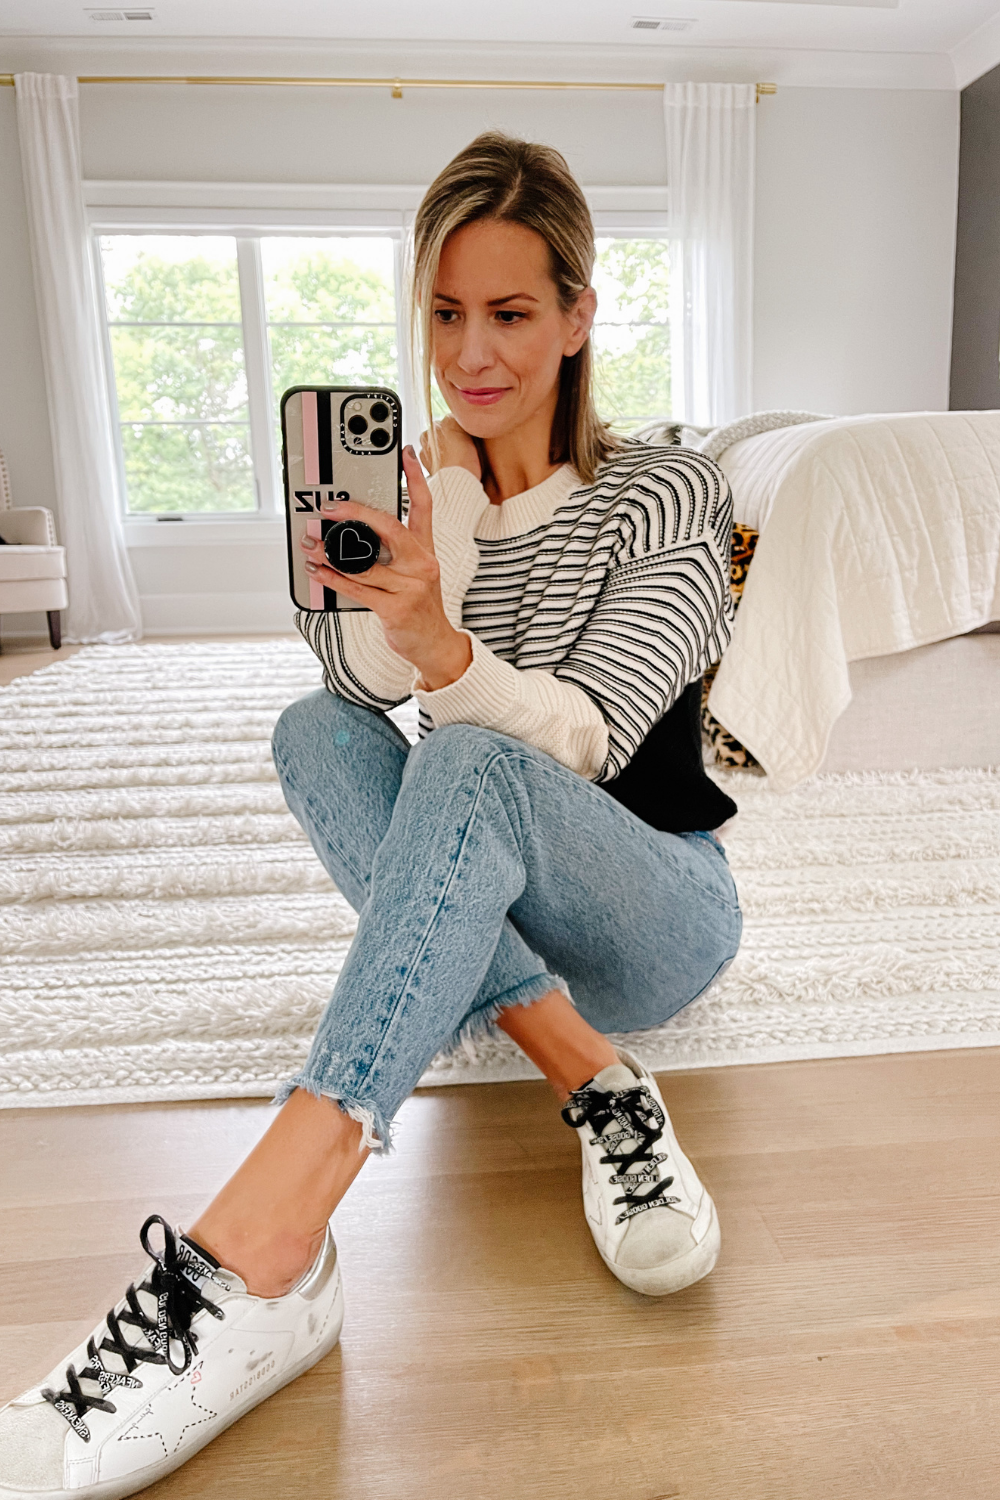 Suzanne wearing a colorblock sweater, jeans, and sneakers